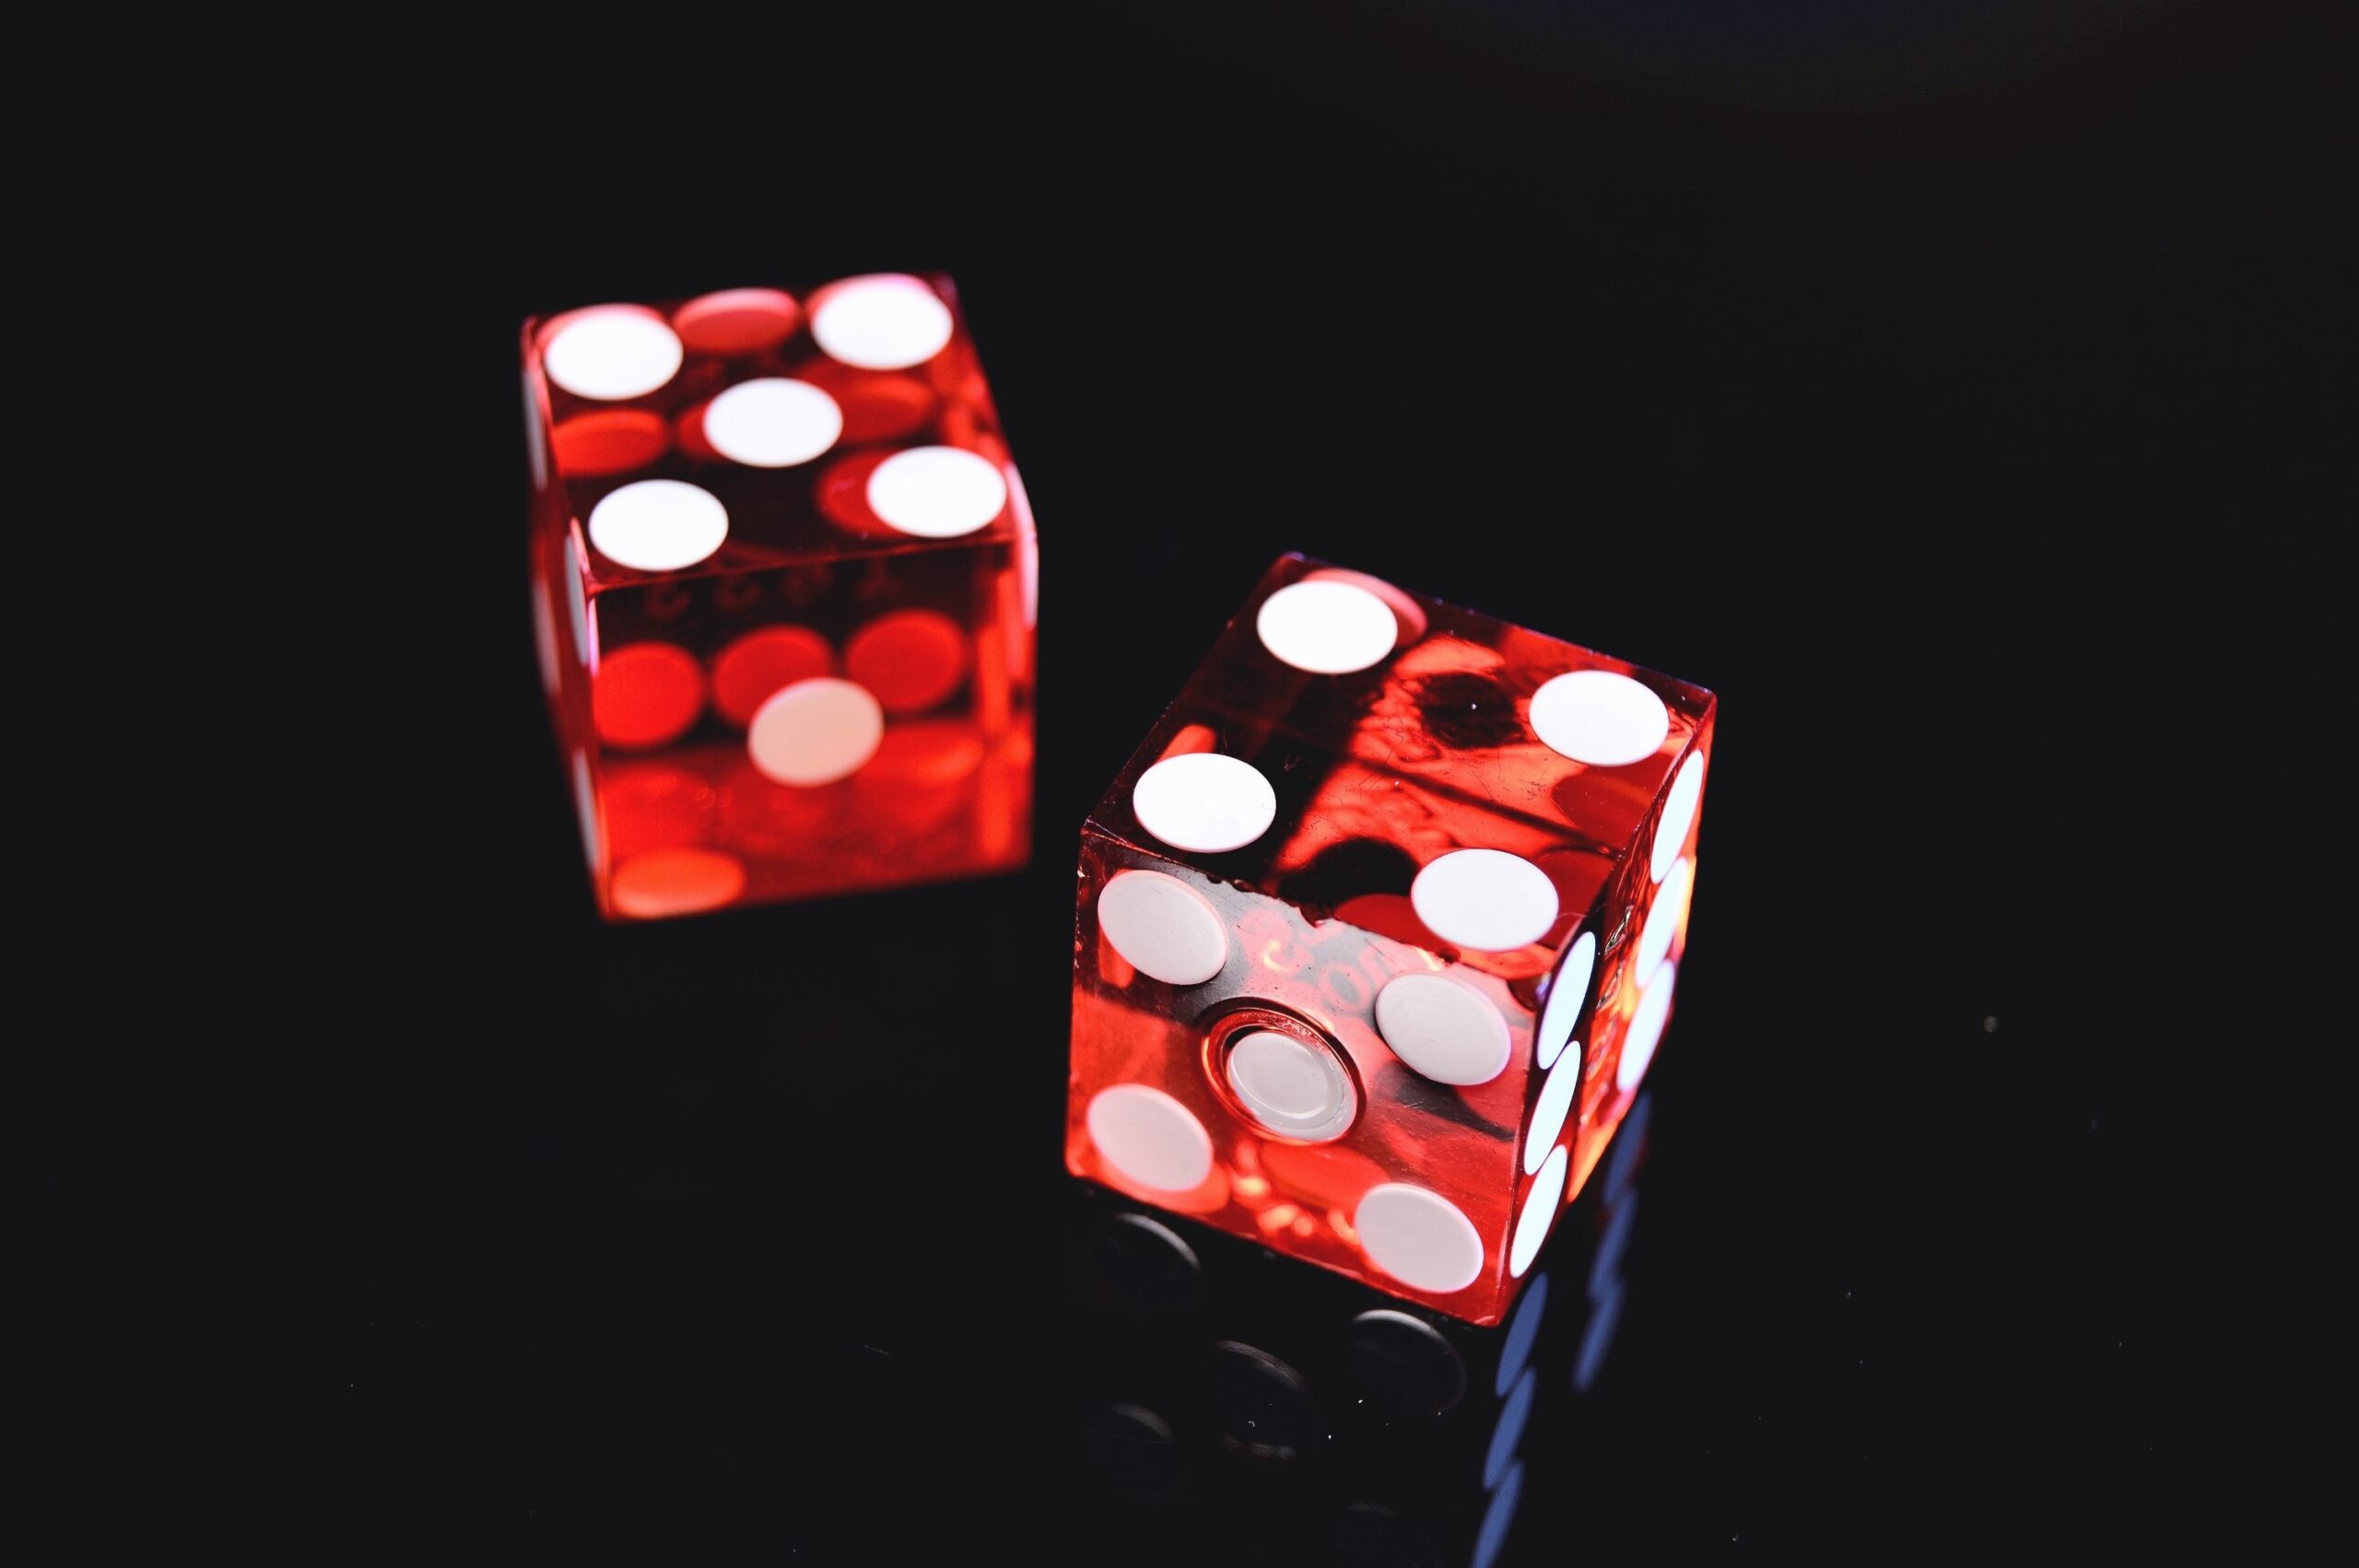 Two red dice showing random numbers on a black background